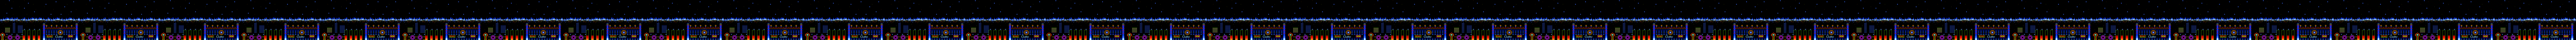 Sonic2 MD Map CNZ BG.png